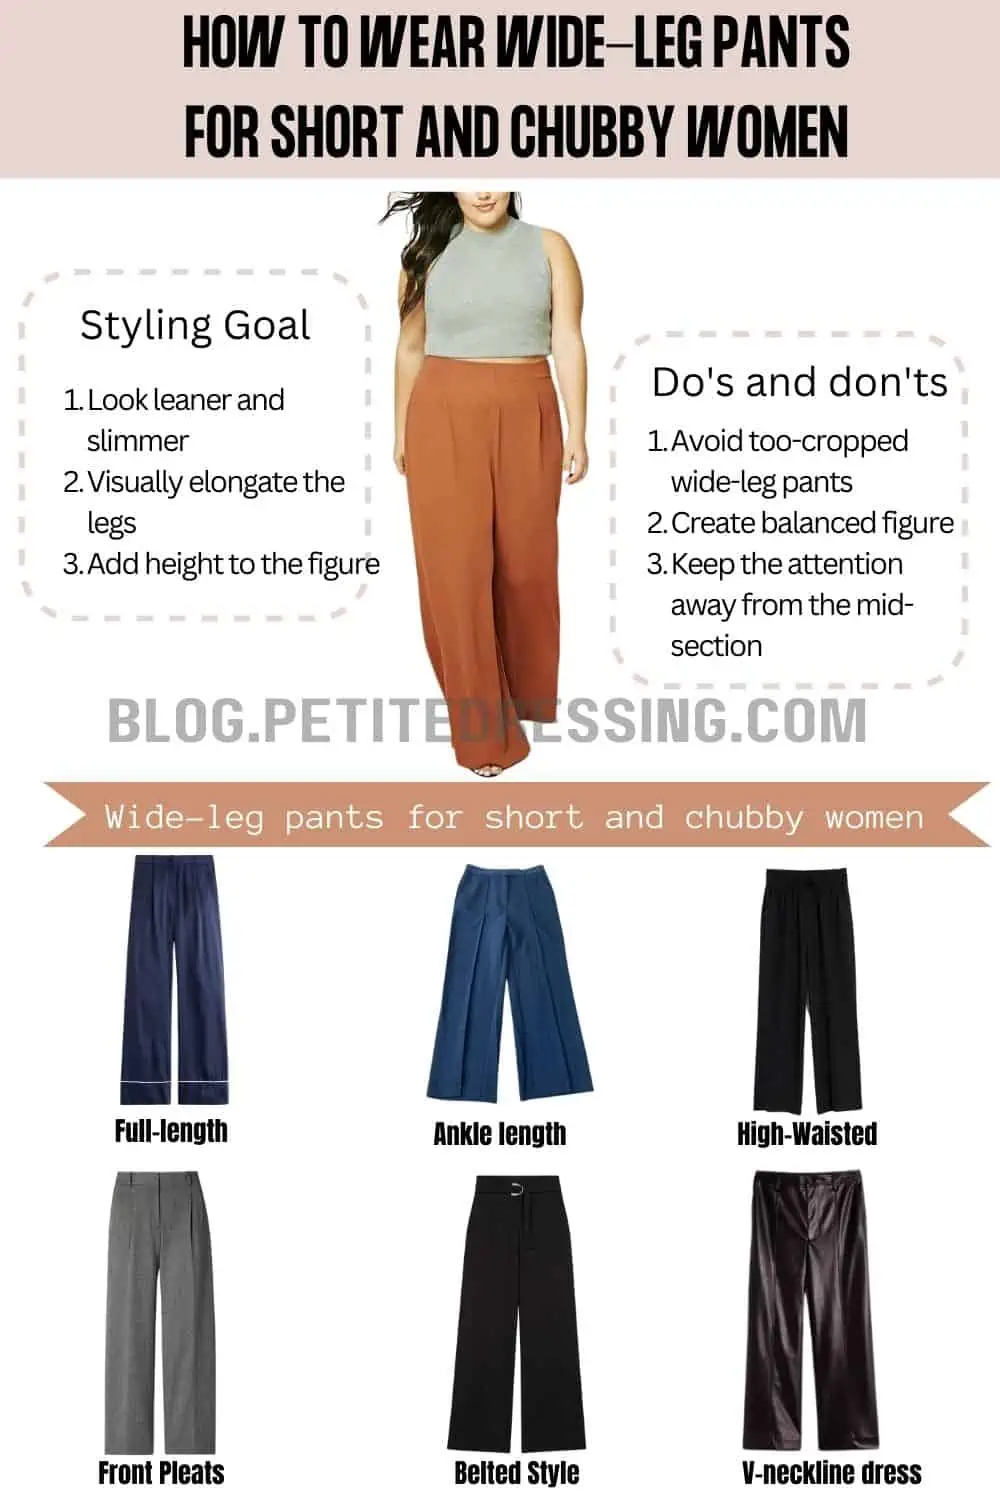 Pants Style Guide for Women with Short and Thick Legs - Petite